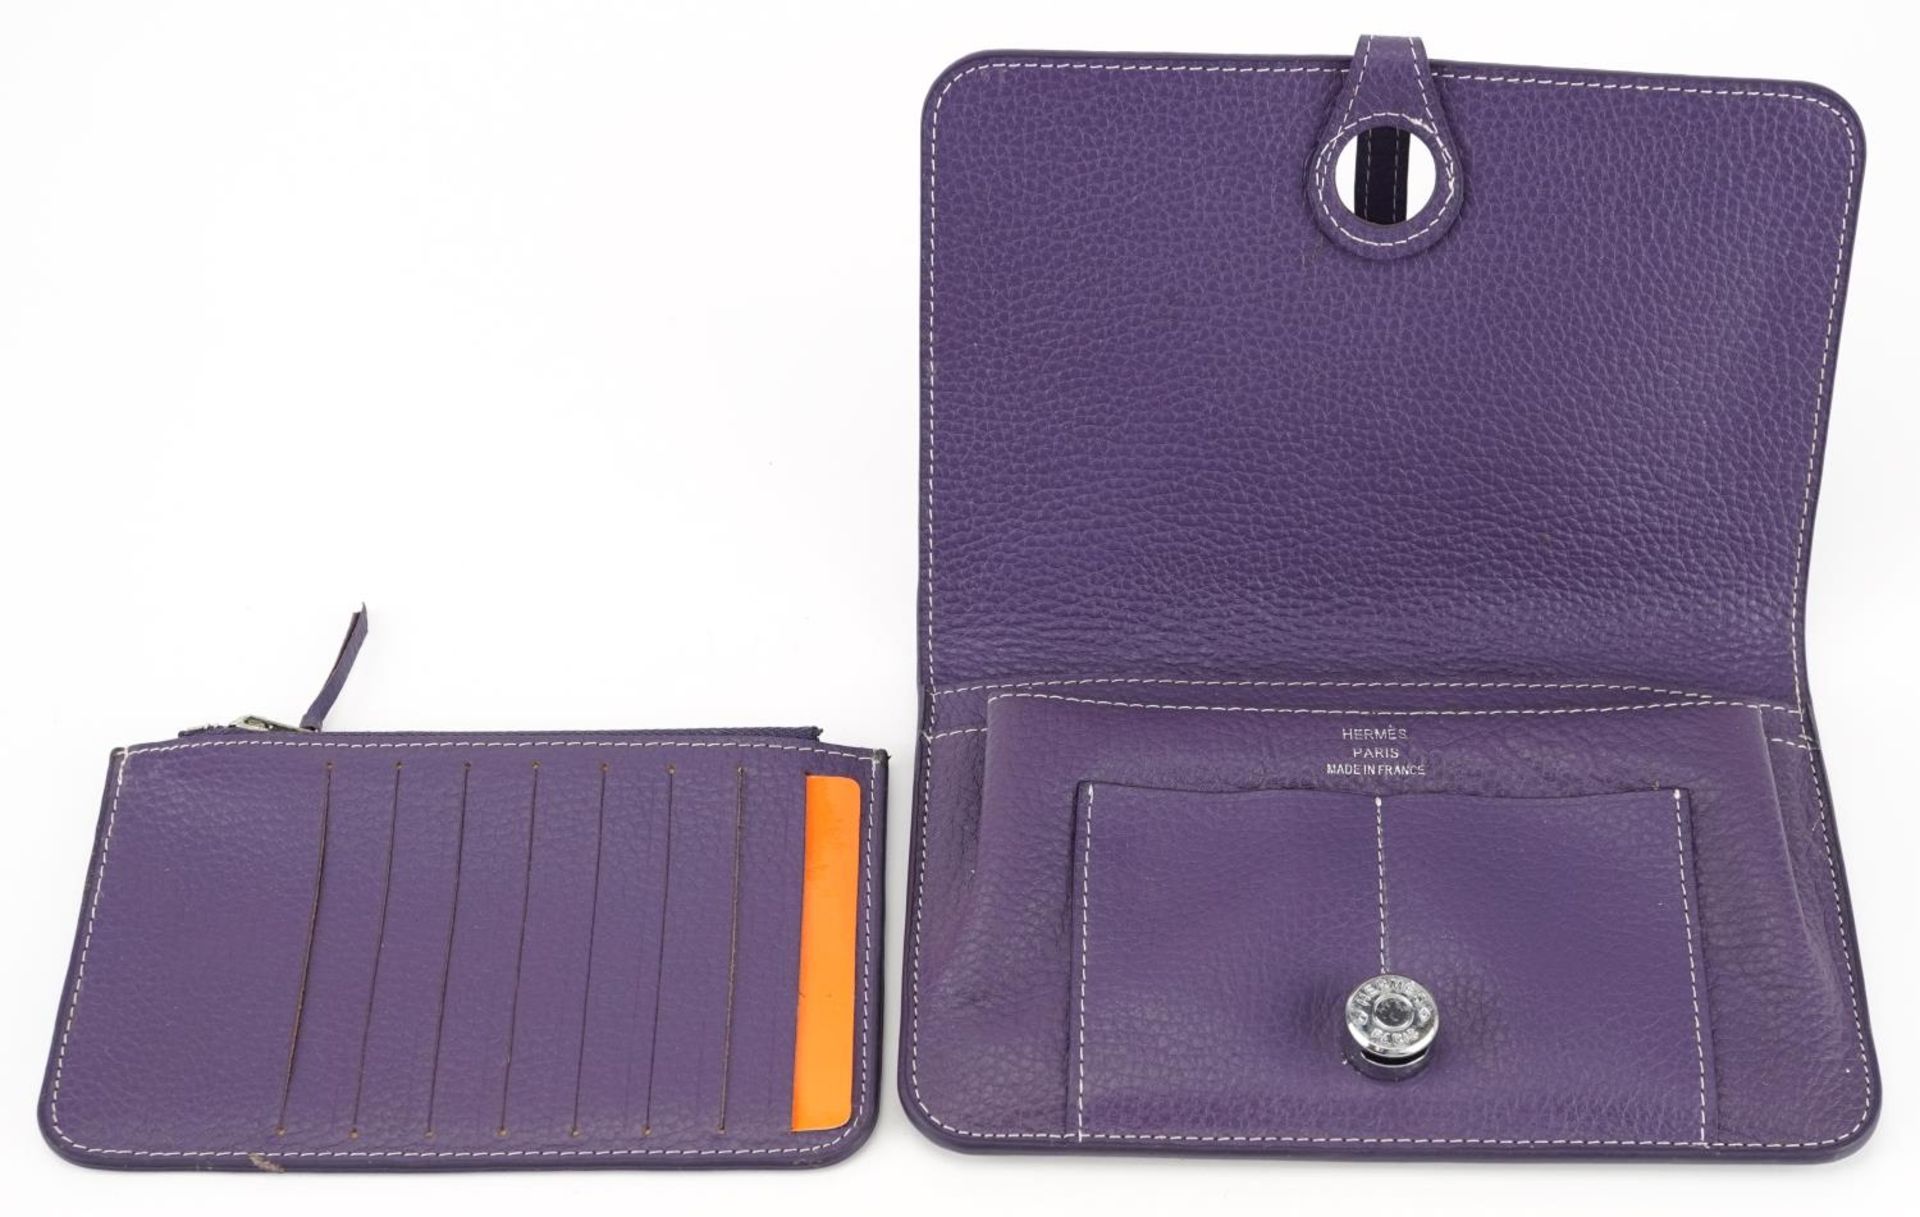 Hermes, French purple leather clutch purse with cardholder, dust bag and box, the clutch bag 19. - Image 4 of 6